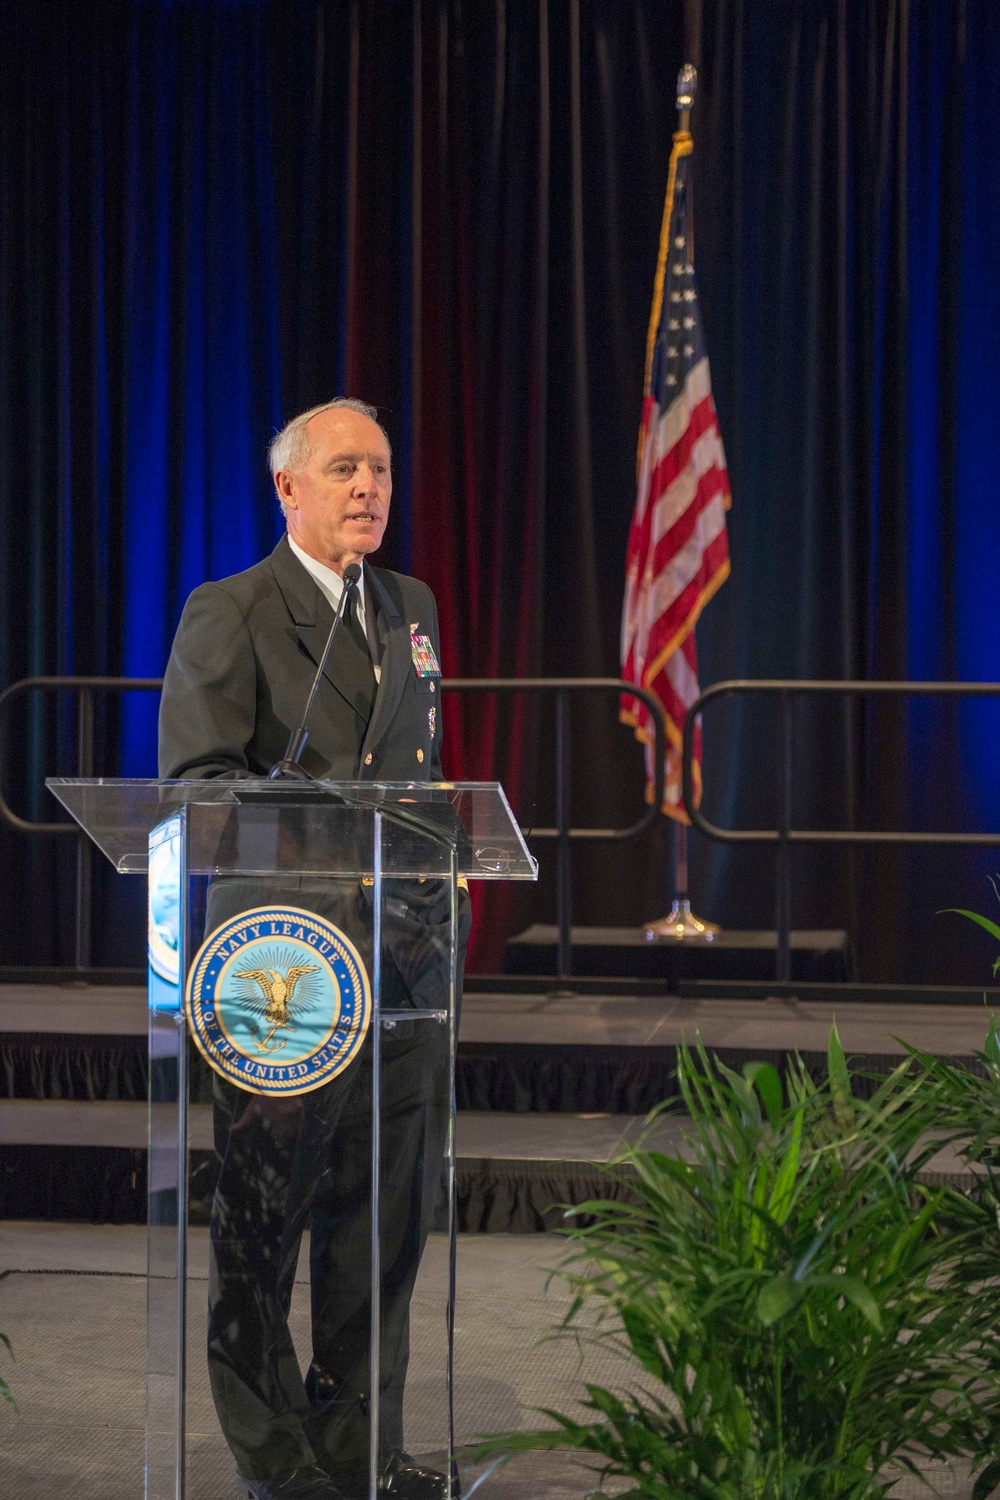 Vice Adm. Kenneth Whitesell speaks at the Centennial of U.S. Navy Aircraft Carriers Recognition Ceremony